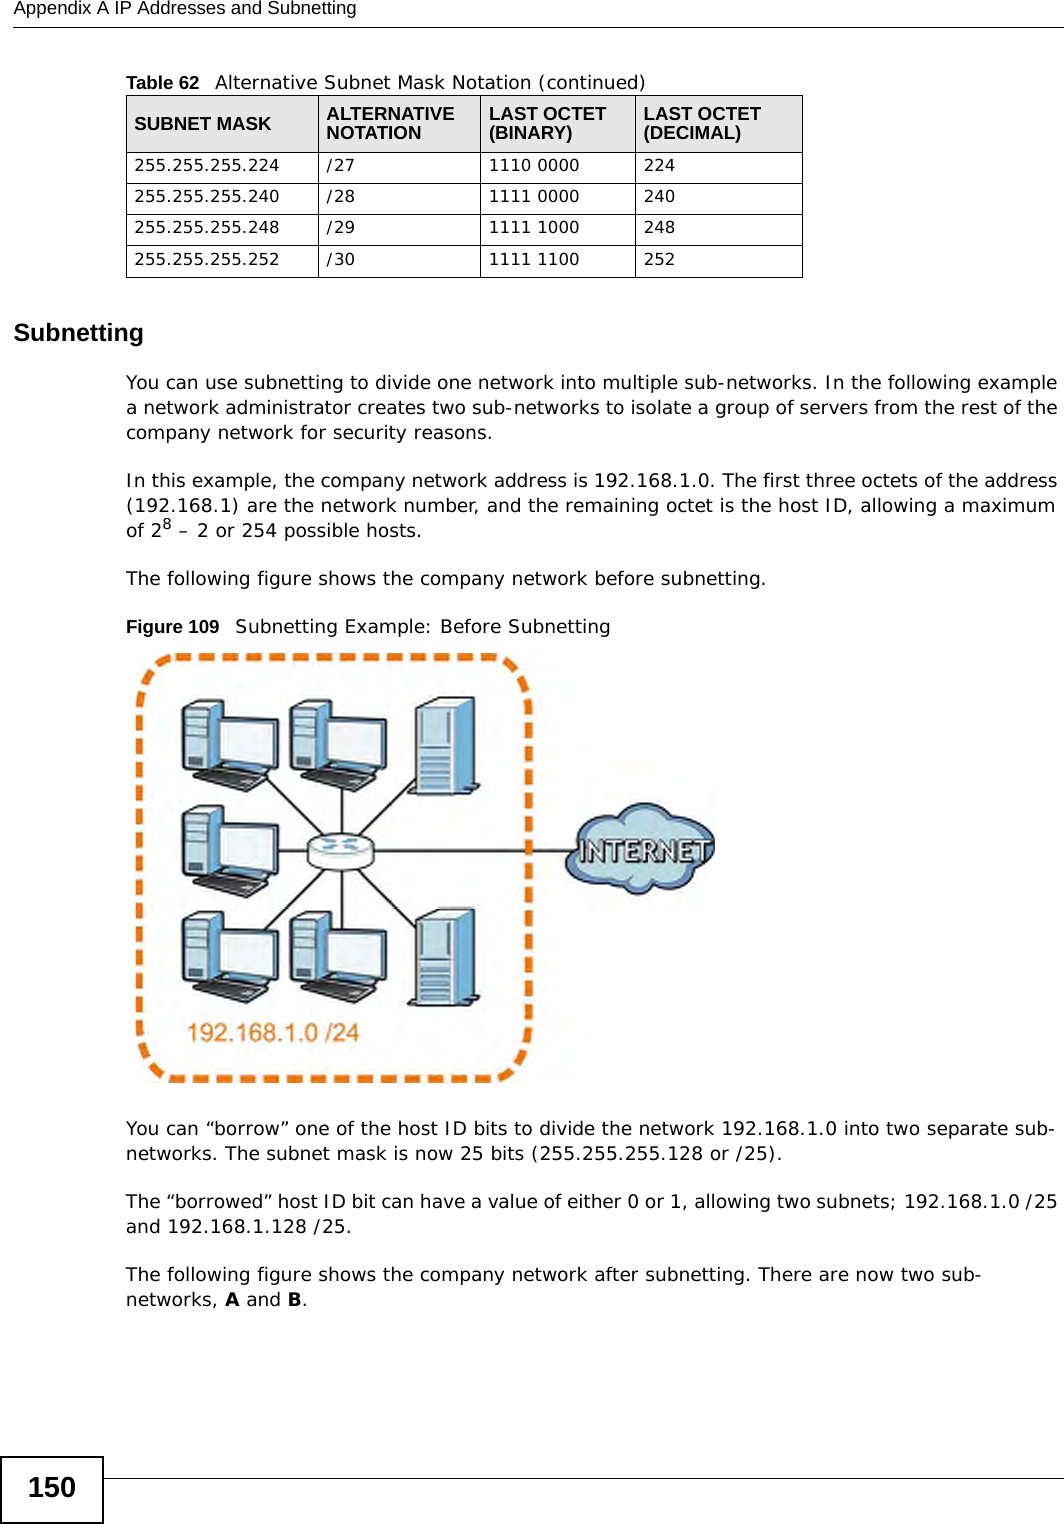 Appendix A IP Addresses and Subnetting150SubnettingYou can use subnetting to divide one network into multiple sub-networks. In the following example a network administrator creates two sub-networks to isolate a group of servers from the rest of the company network for security reasons.In this example, the company network address is 192.168.1.0. The first three octets of the address (192.168.1) are the network number, and the remaining octet is the host ID, allowing a maximum of 28 – 2 or 254 possible hosts.The following figure shows the company network before subnetting.  Figure 109   Subnetting Example: Before SubnettingYou can “borrow” one of the host ID bits to divide the network 192.168.1.0 into two separate sub-networks. The subnet mask is now 25 bits (255.255.255.128 or /25).The “borrowed” host ID bit can have a value of either 0 or 1, allowing two subnets; 192.168.1.0 /25 and 192.168.1.128 /25. The following figure shows the company network after subnetting. There are now two sub-networks, A and B. 255.255.255.224 /271110 0000 224255.255.255.240 /281111 0000 240255.255.255.248 /291111 1000 248255.255.255.252 /301111 1100 252Table 62   Alternative Subnet Mask Notation (continued)SUBNET MASK ALTERNATIVE NOTATION LAST OCTET (BINARY) LAST OCTET (DECIMAL)